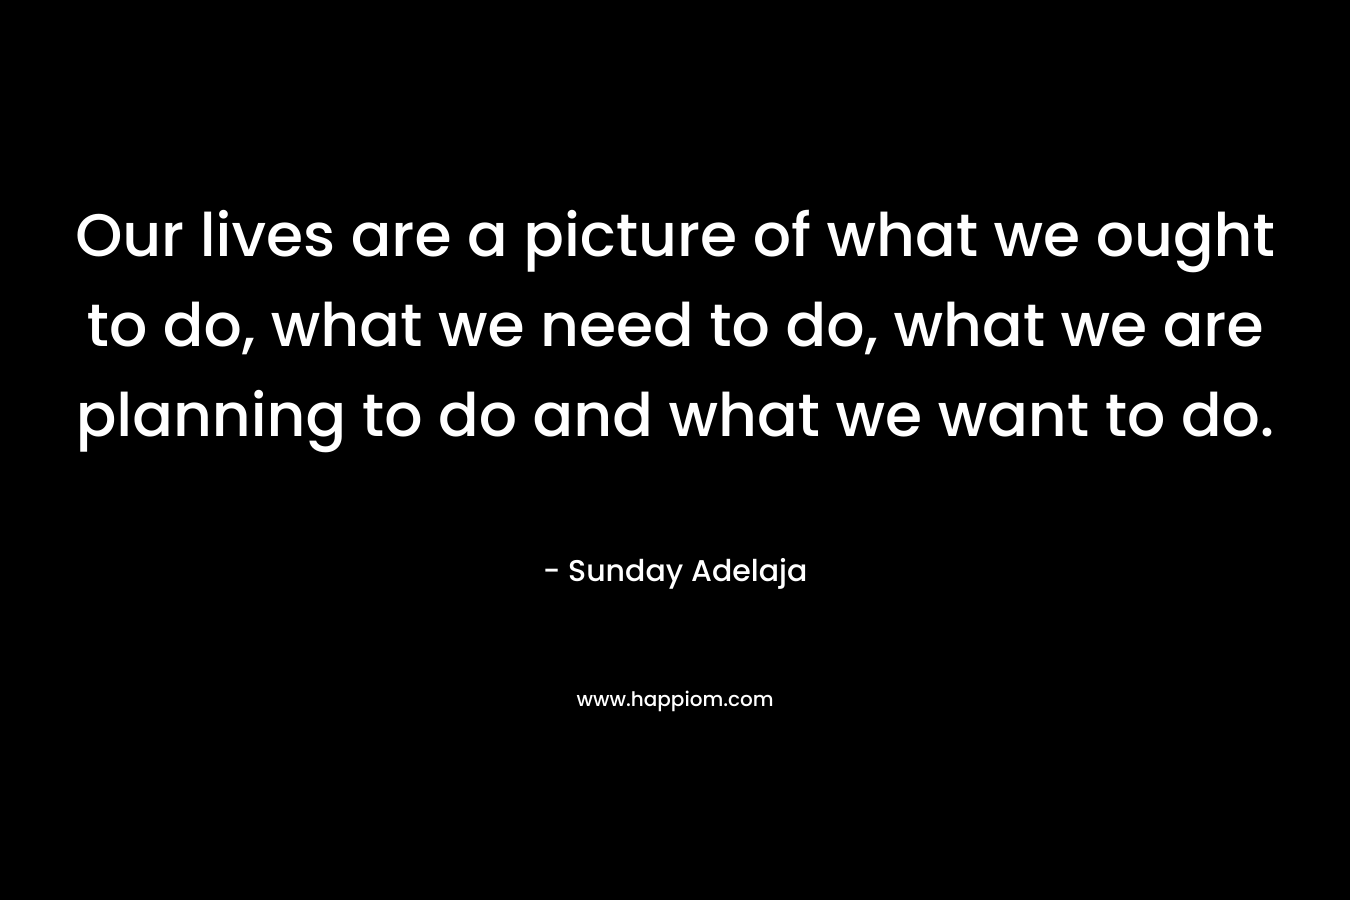 Our lives are a picture of what we ought to do, what we need to do, what we are planning to do and what we want to do.